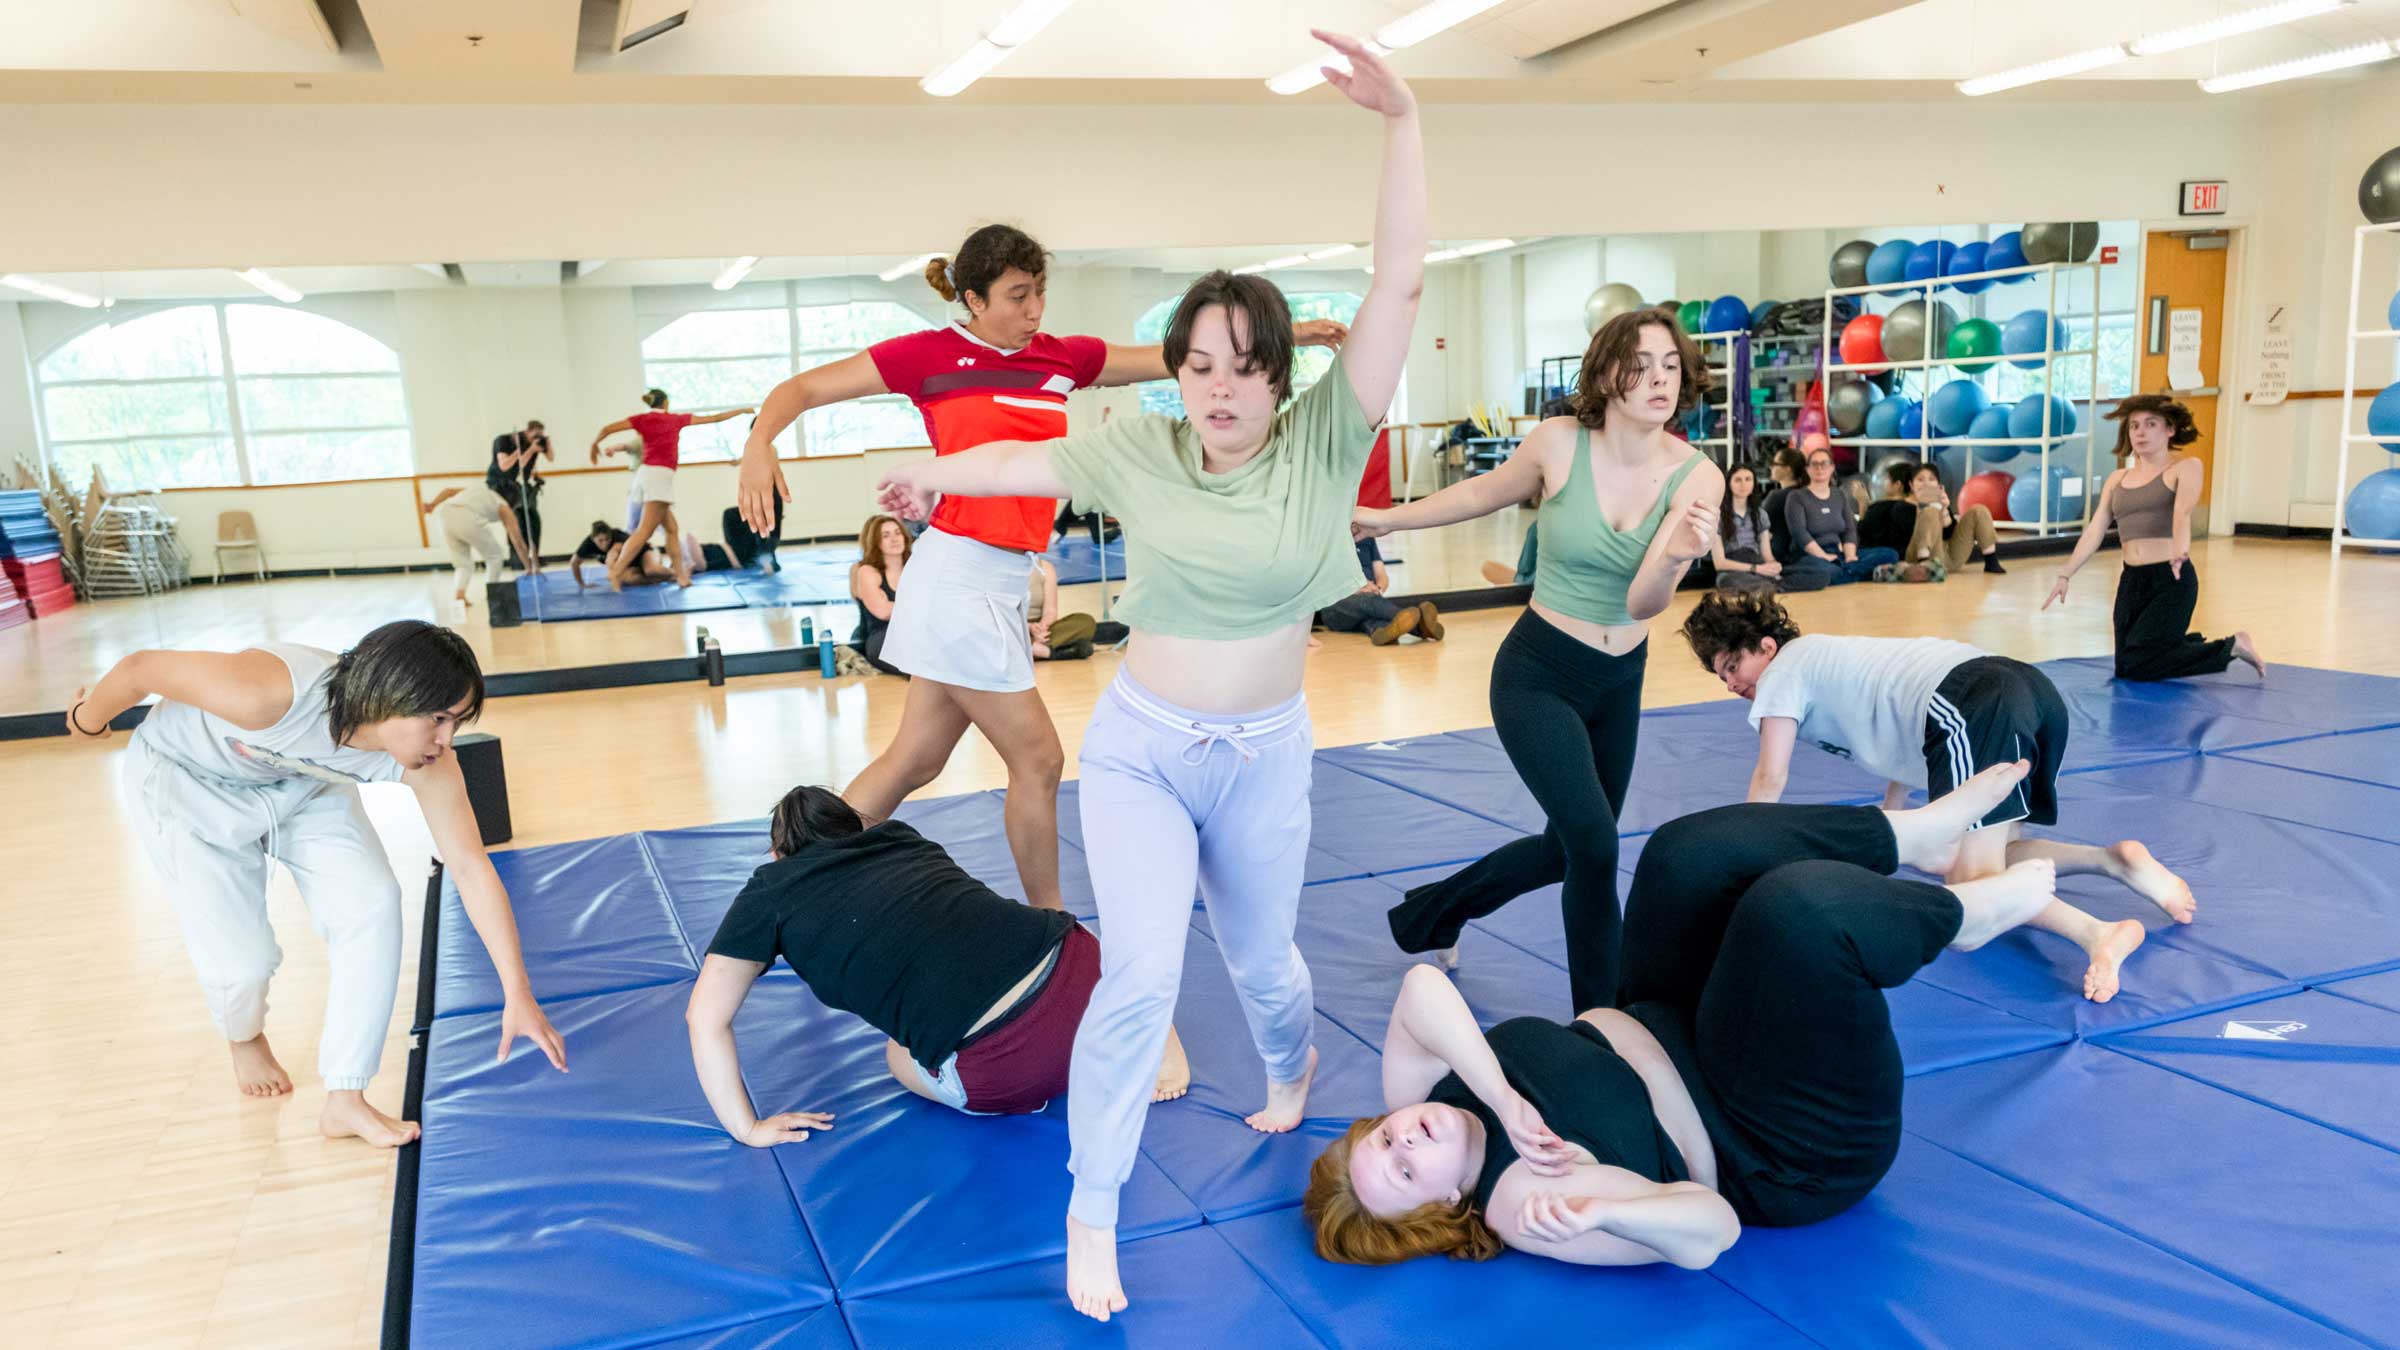 Group of people on a mat practicing dramatic acrobatics.